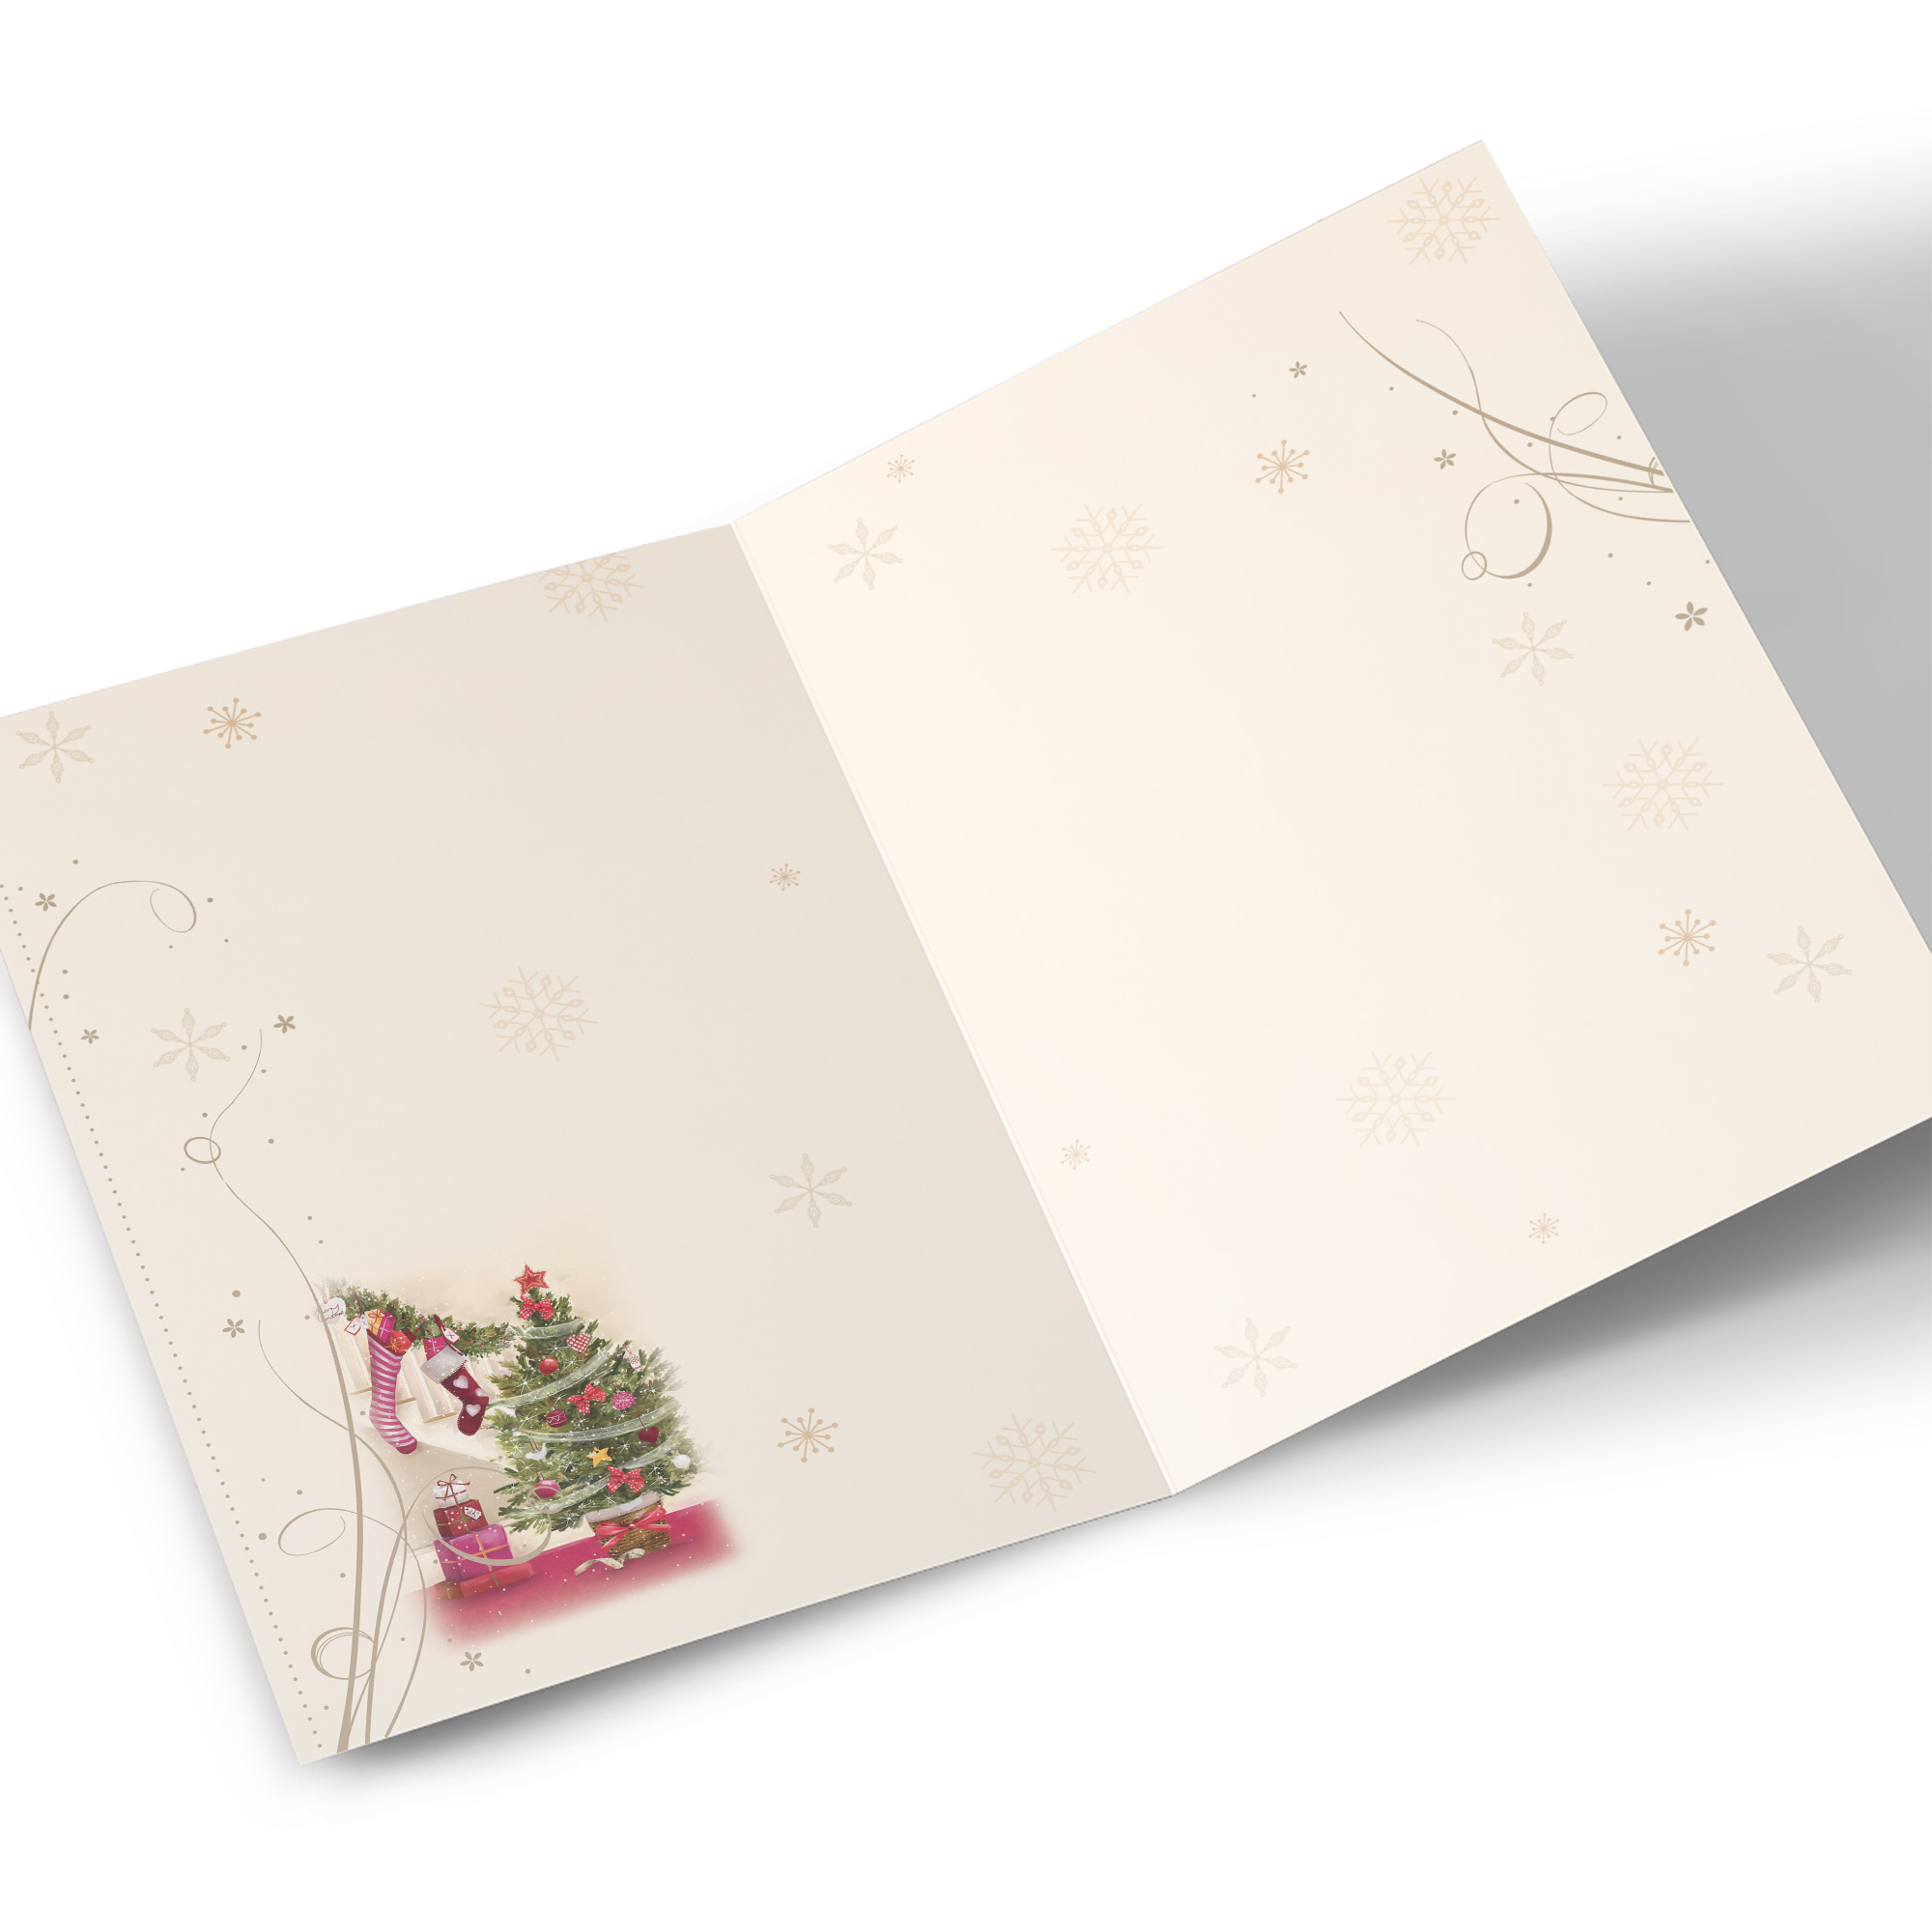 Personalised Christmas Card - Tree, Stockings & Gifts